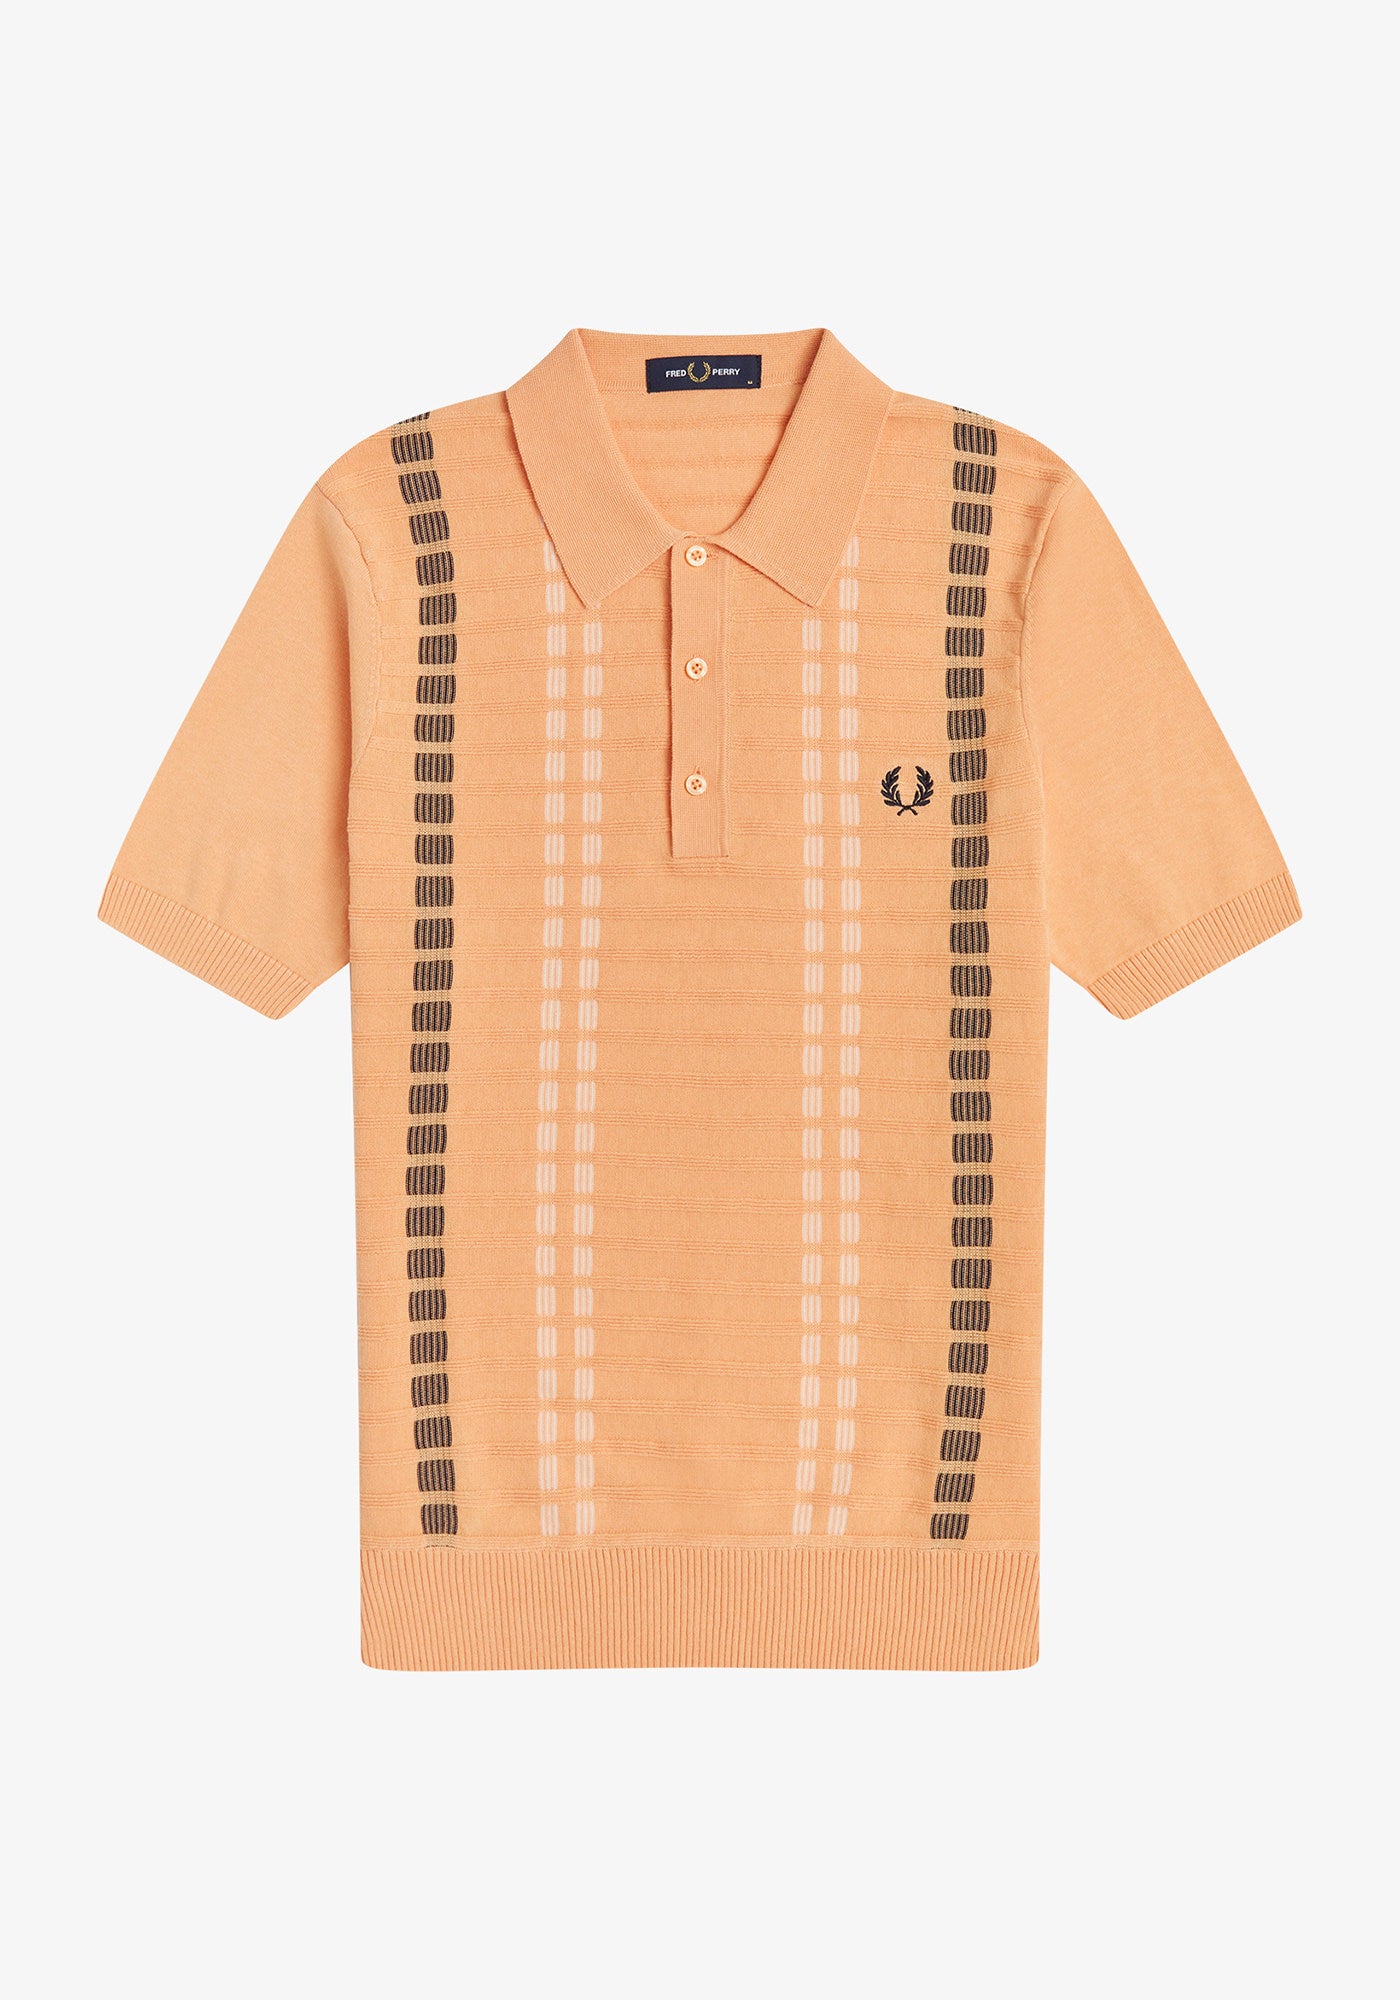 Fred Perry Broken Stripe Knitted Shirt